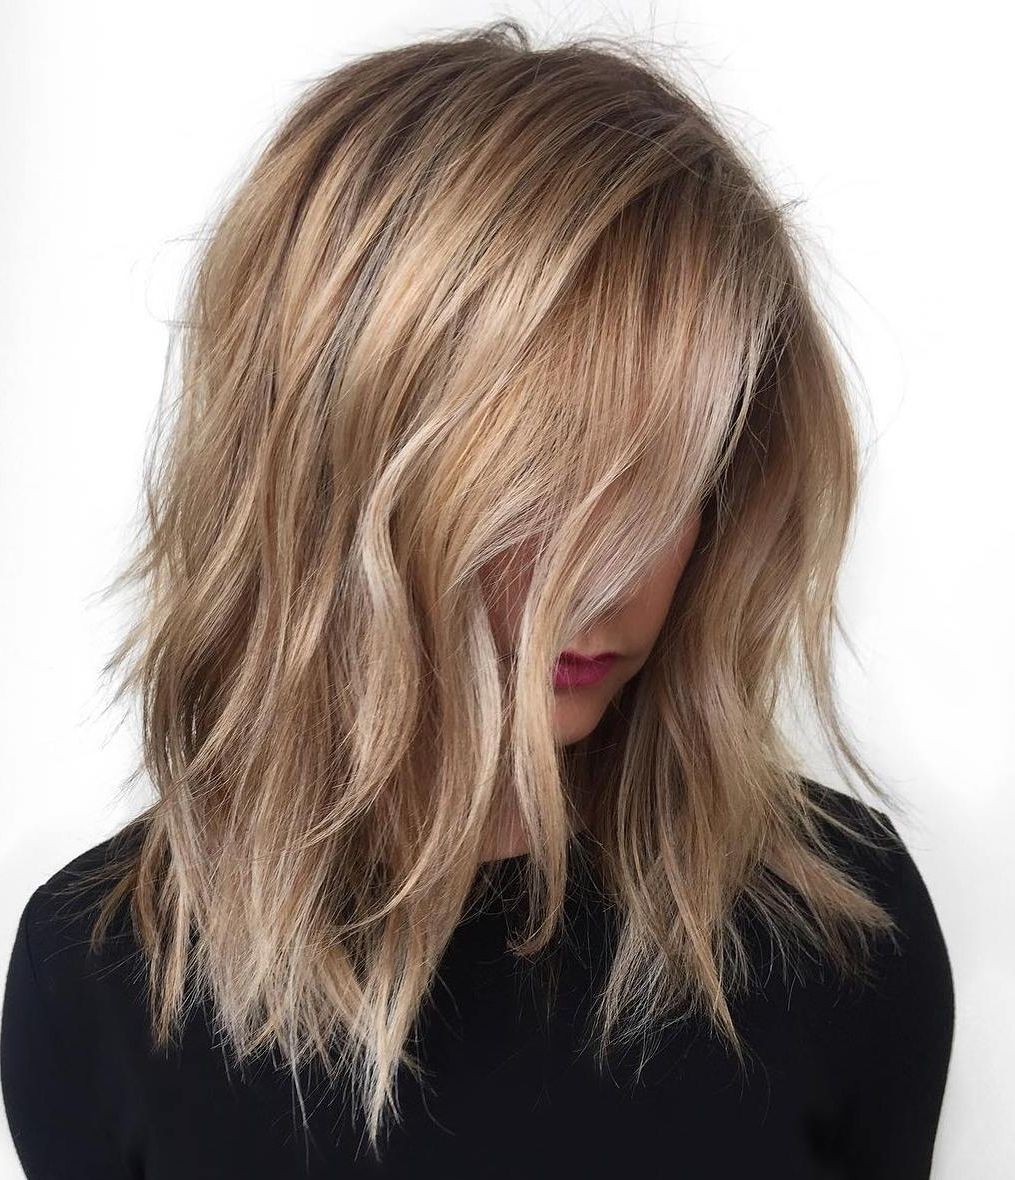 Favorite Feathered Cut Blonde Hairstyles With Middle Part Pertaining To 40 Styles With Medium Blonde Hair For Major Inspiration (Gallery 4 of 20)